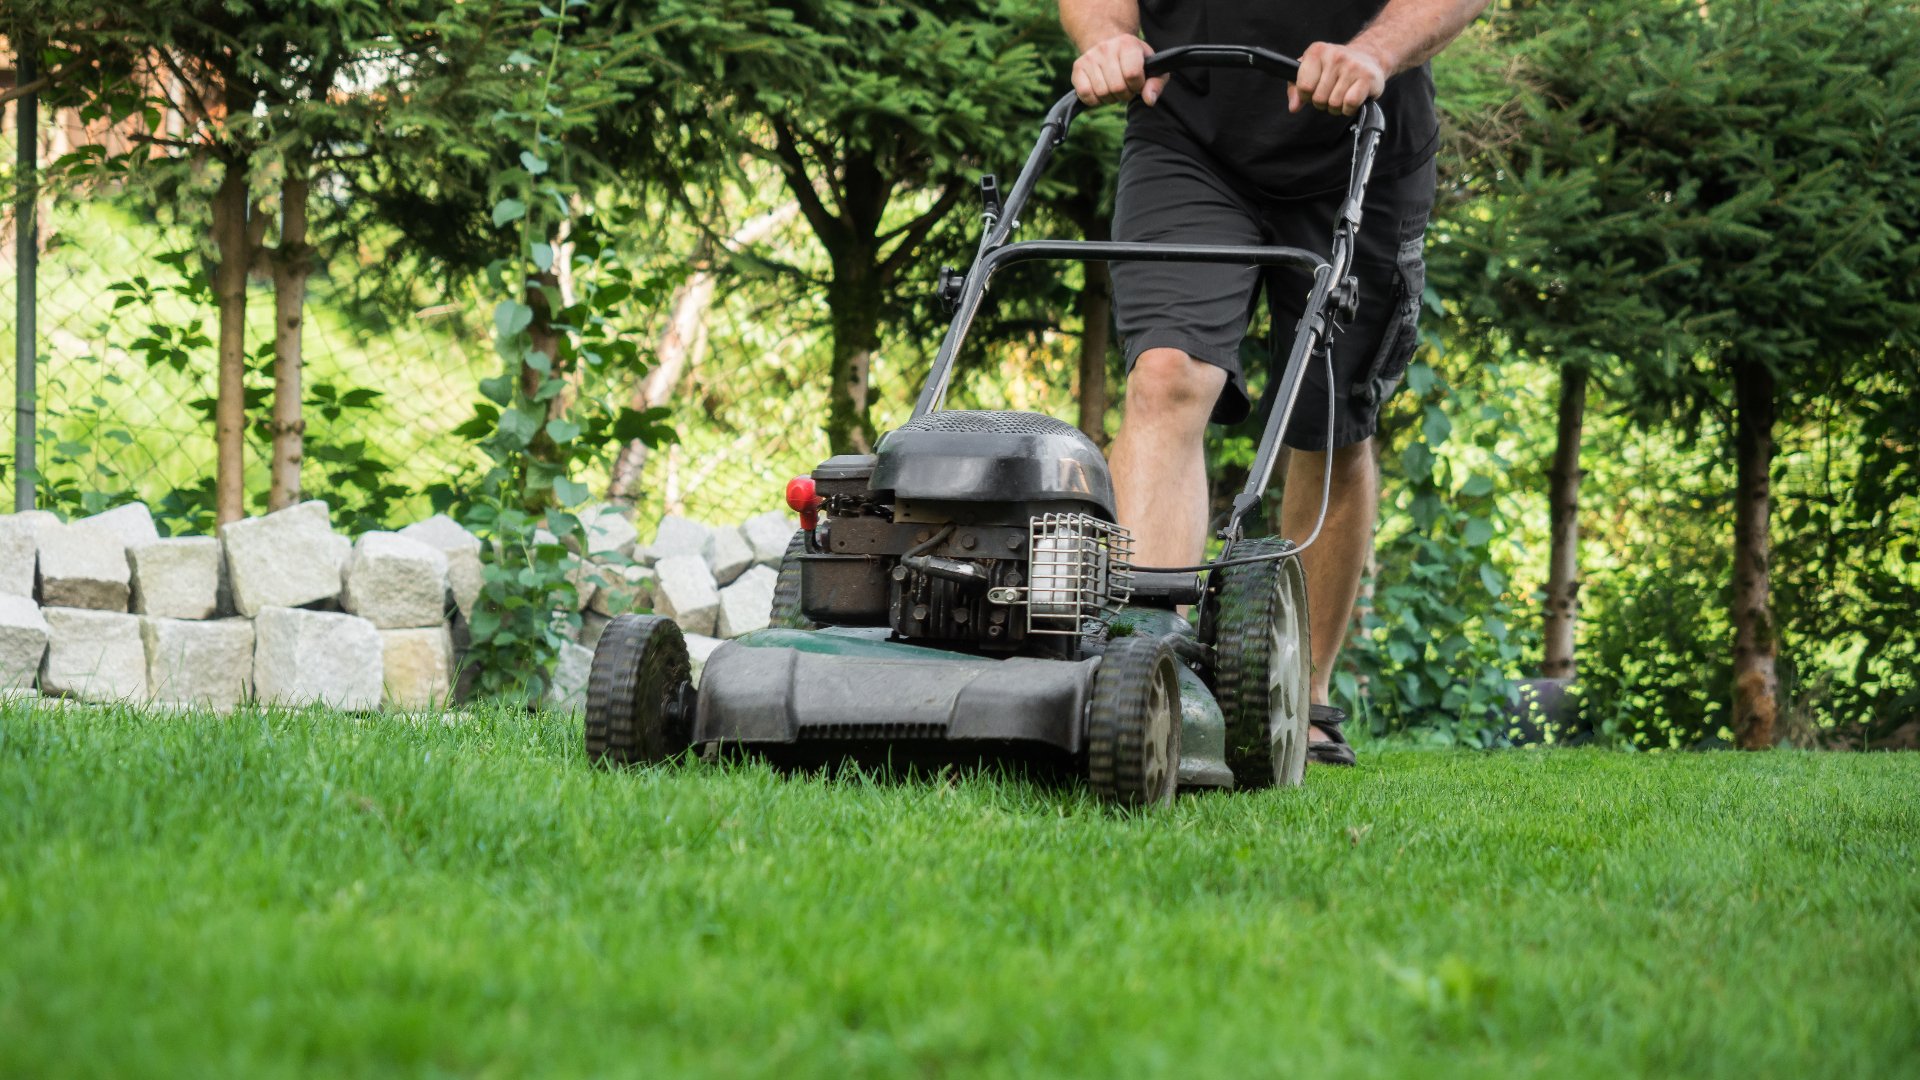 3 Things to Know Before Mowing Your Newly Sodded Lawn for the First Time